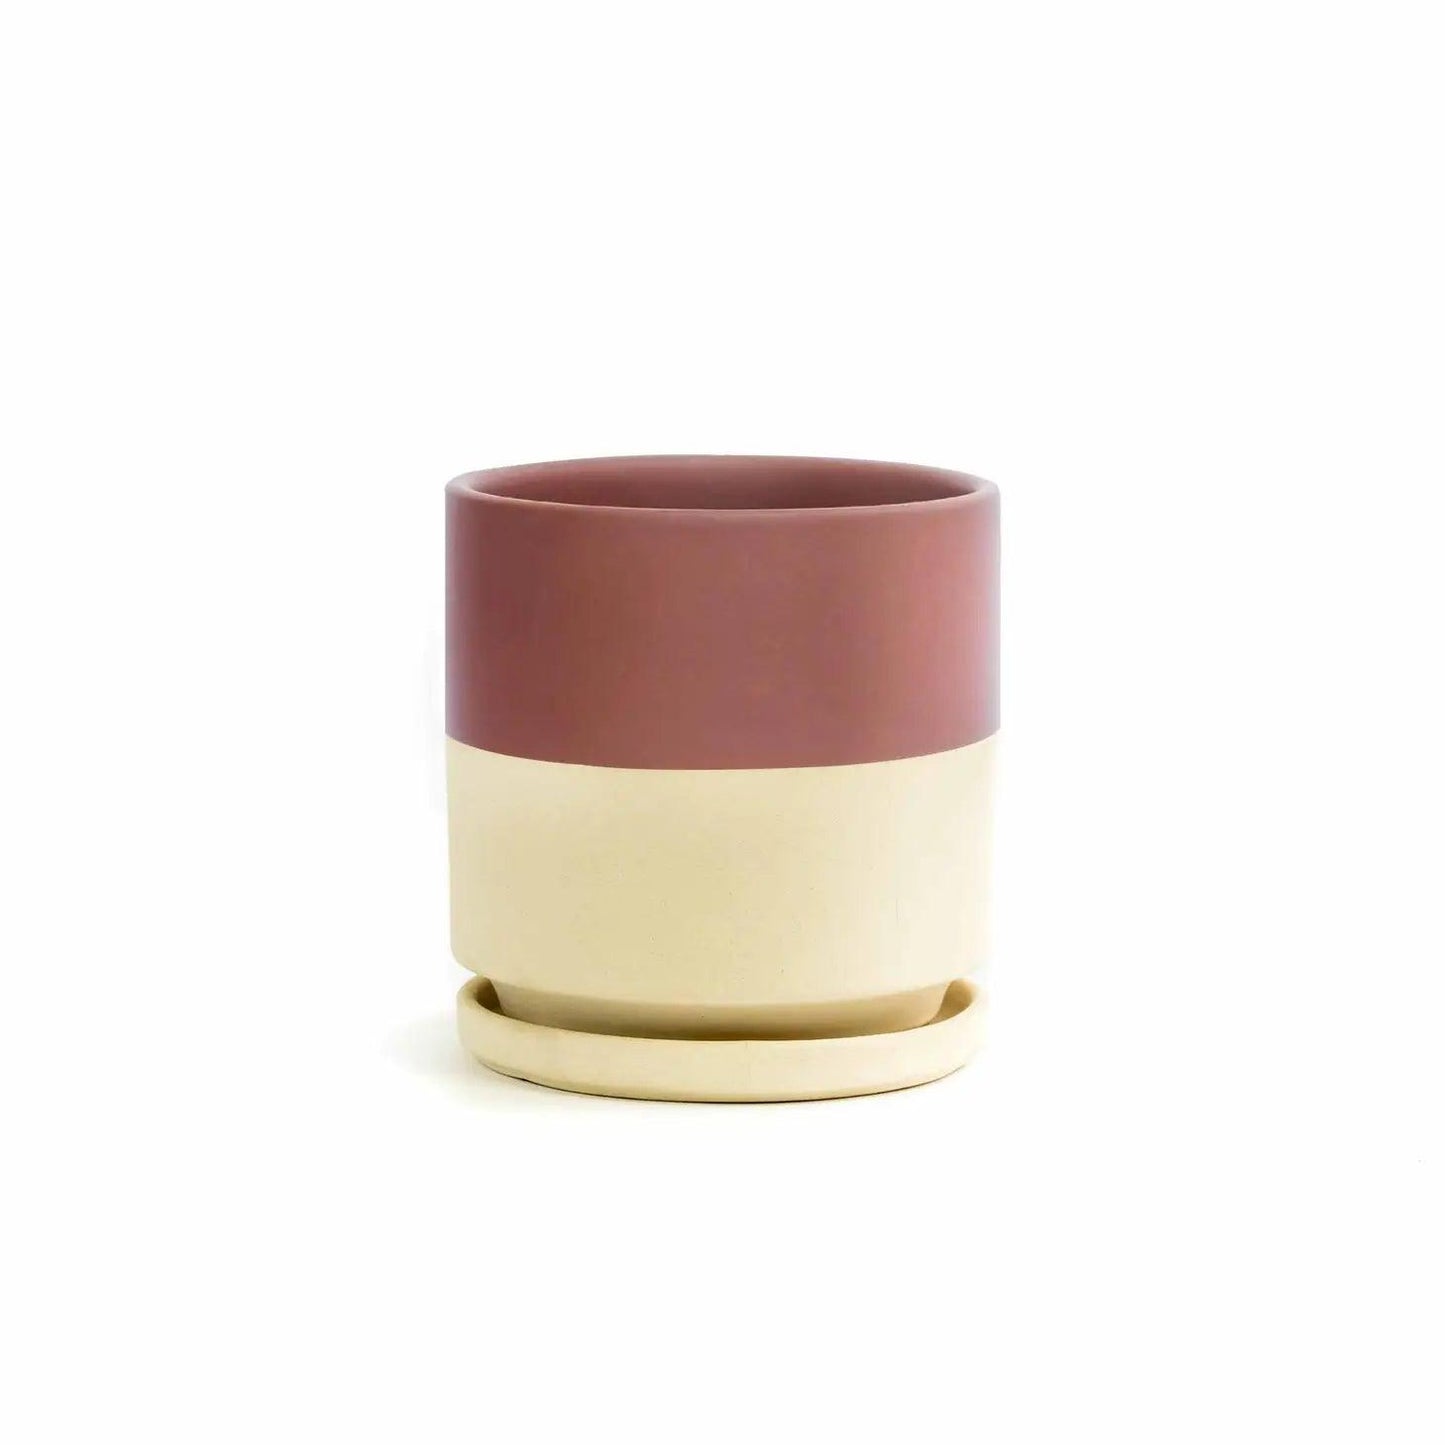 6.5" Gemstone Cylinder Pots with Water Tray